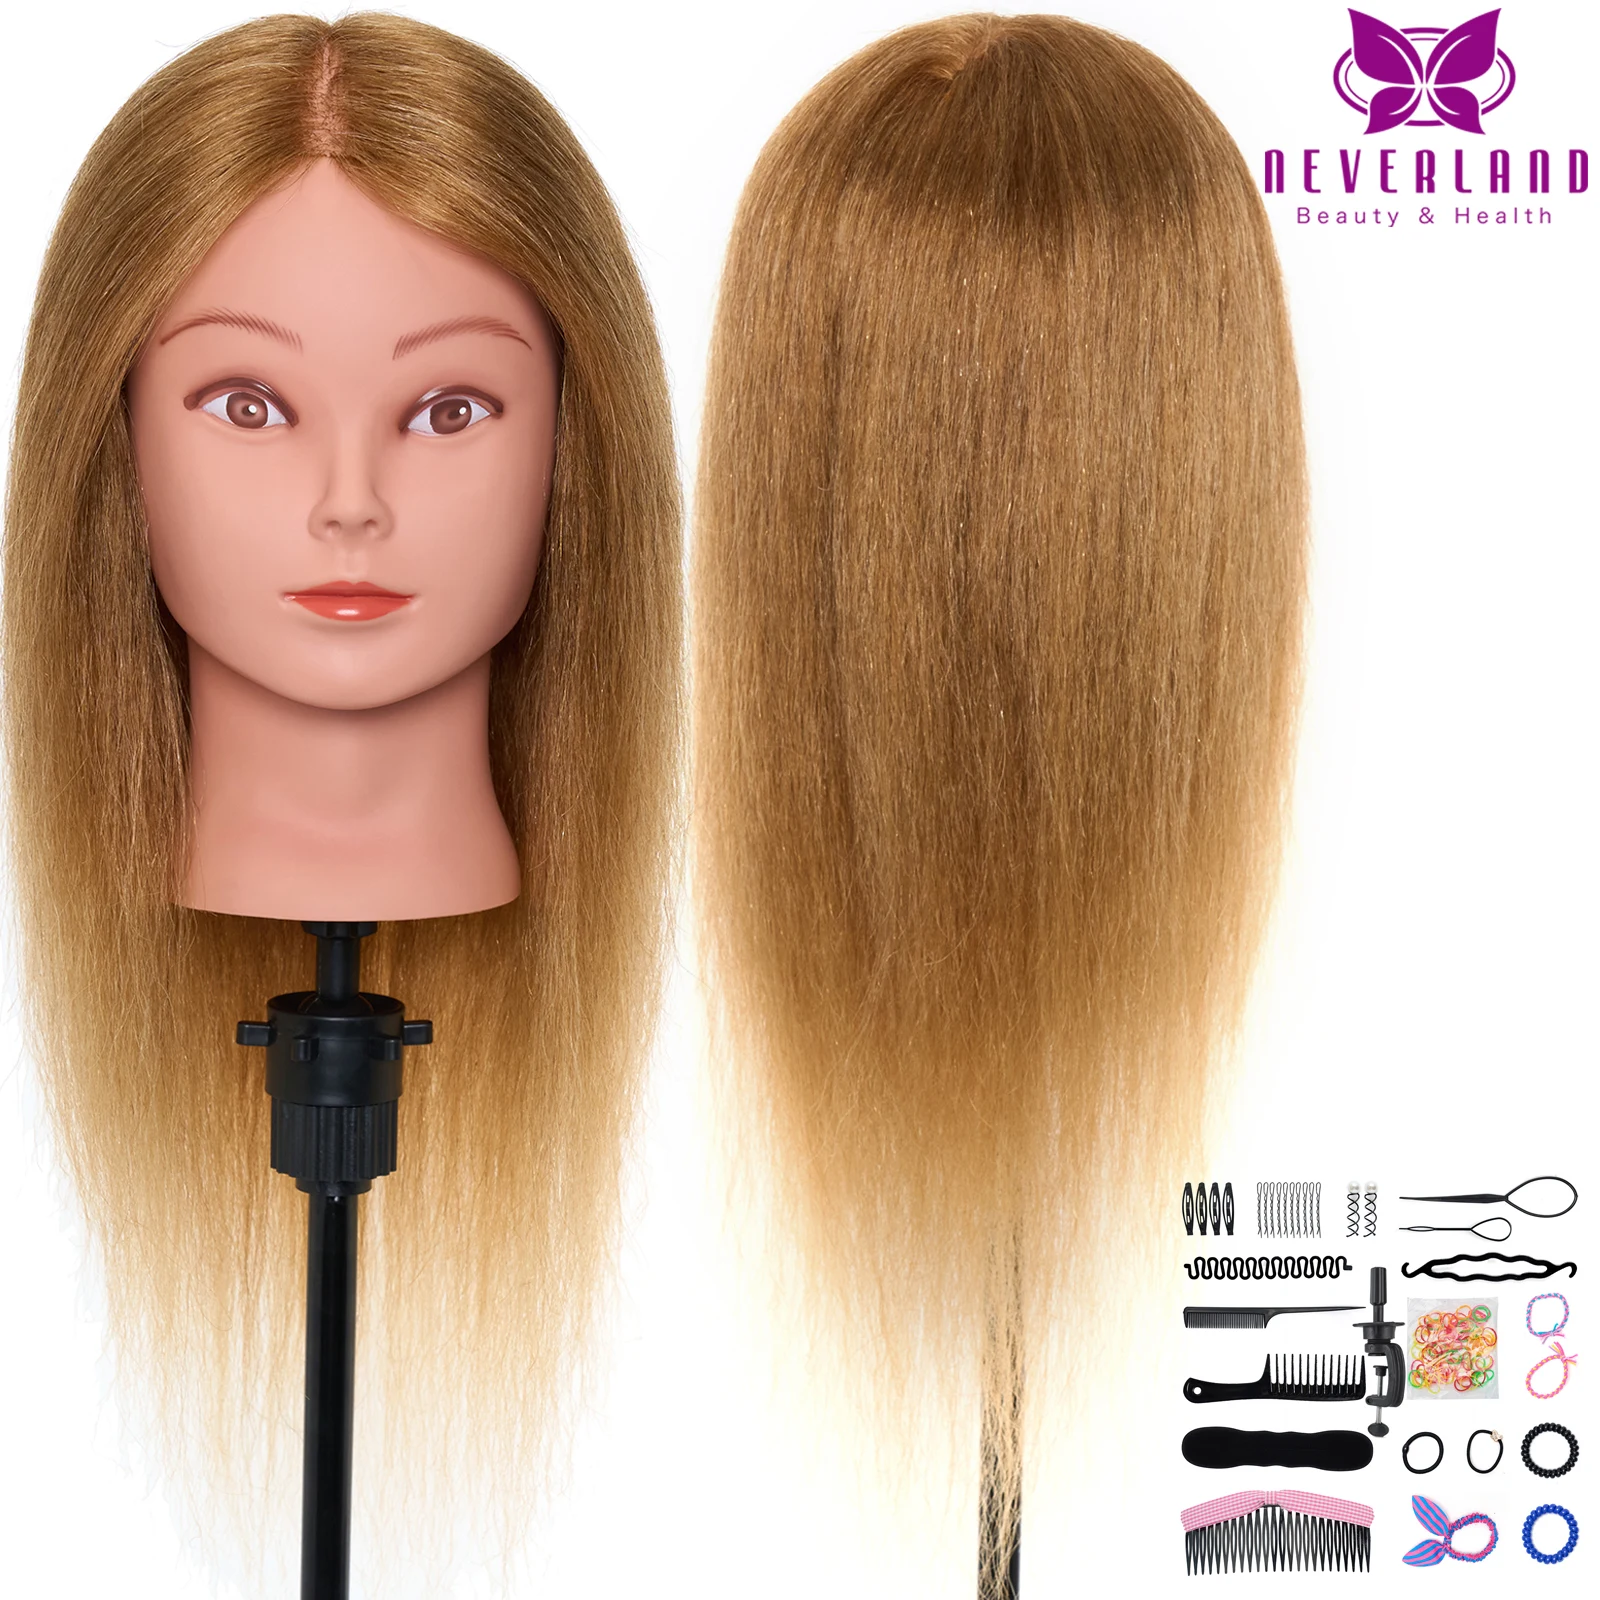 neverland-real-hair-training-head-styling-doll-20-inch-professional-styling-hairdressing-mannequin-with-hair-training-head-kit